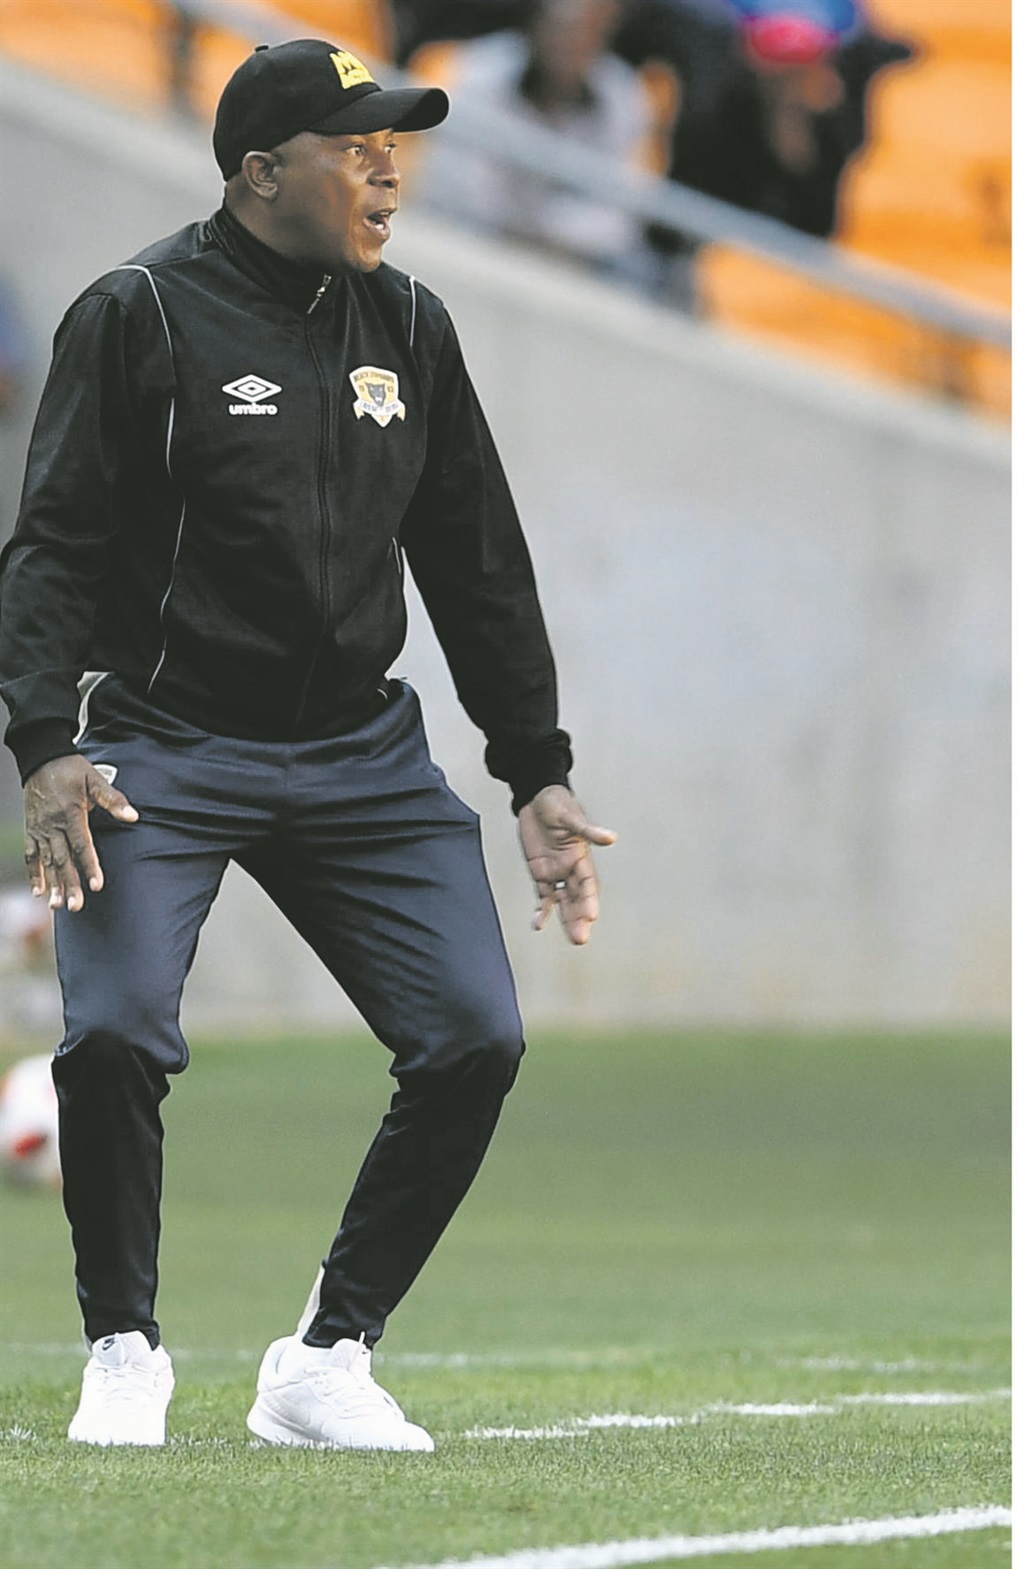 Black Leopards coach Joel Masutha and Kaizer Chiefs’ man of the moment Ramahlwe Mphahlele agree it will be a thriller of a match.Photos by Gallo Images and Backpagepix